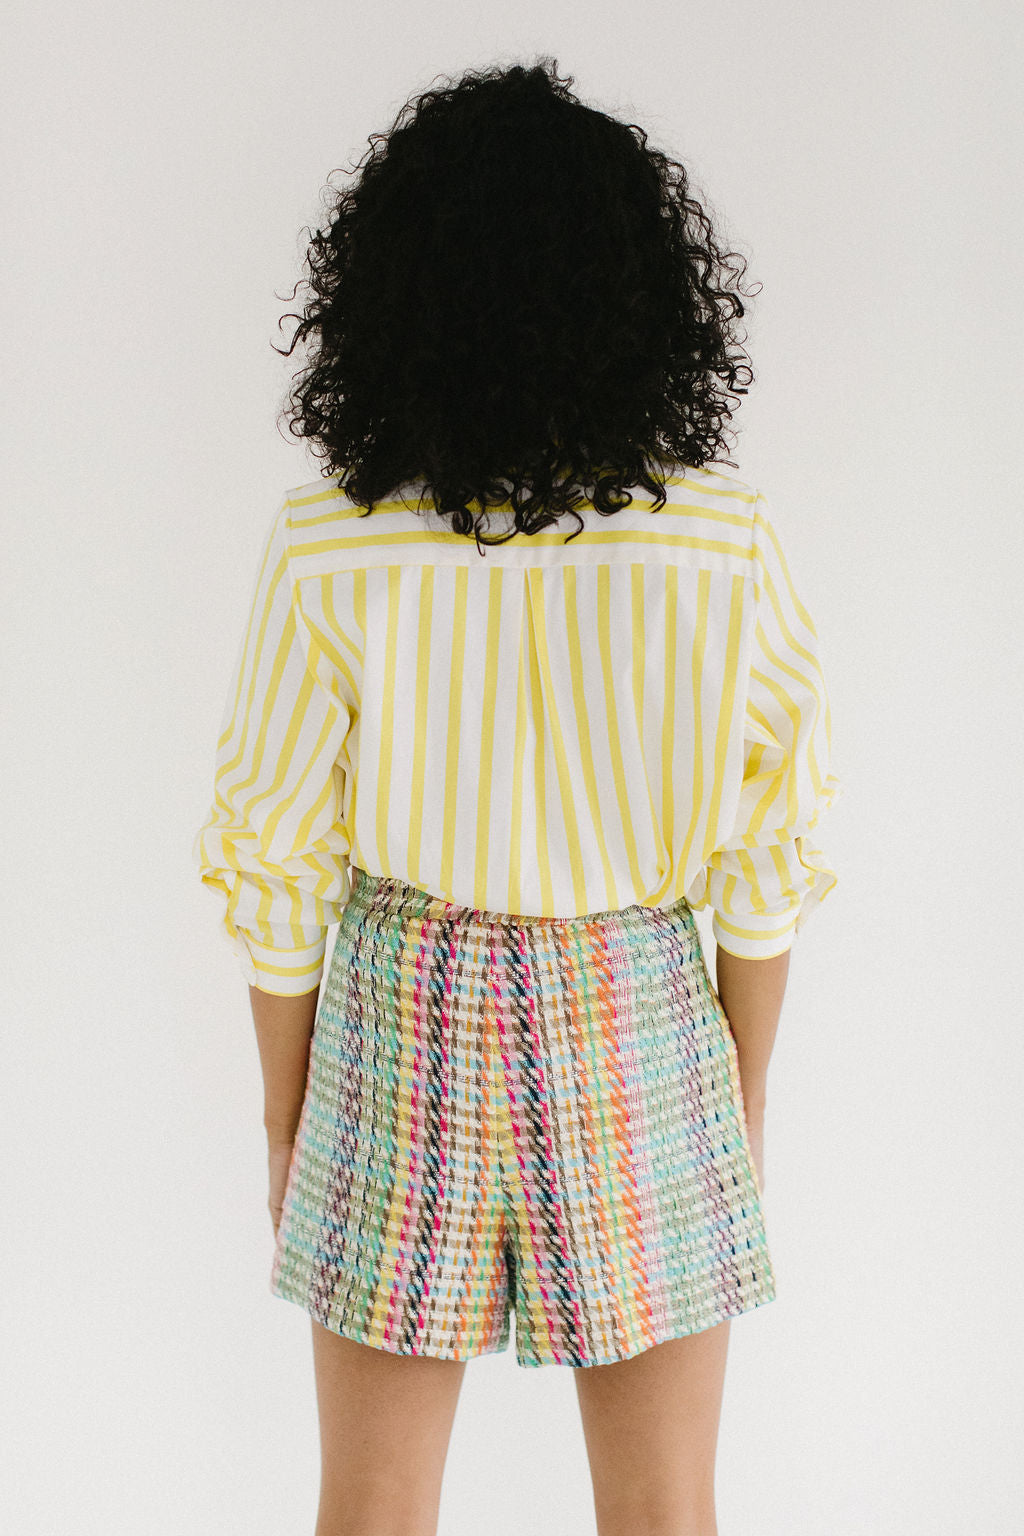 A back view of a woman with olive skin and short, black, curly hair staring directly at the camera with a small smile. She's wearing chunky gold hoop earrings, a white and yellow striped button down shirt pushed up to the elbows and a pair of colorful plaid shorts.